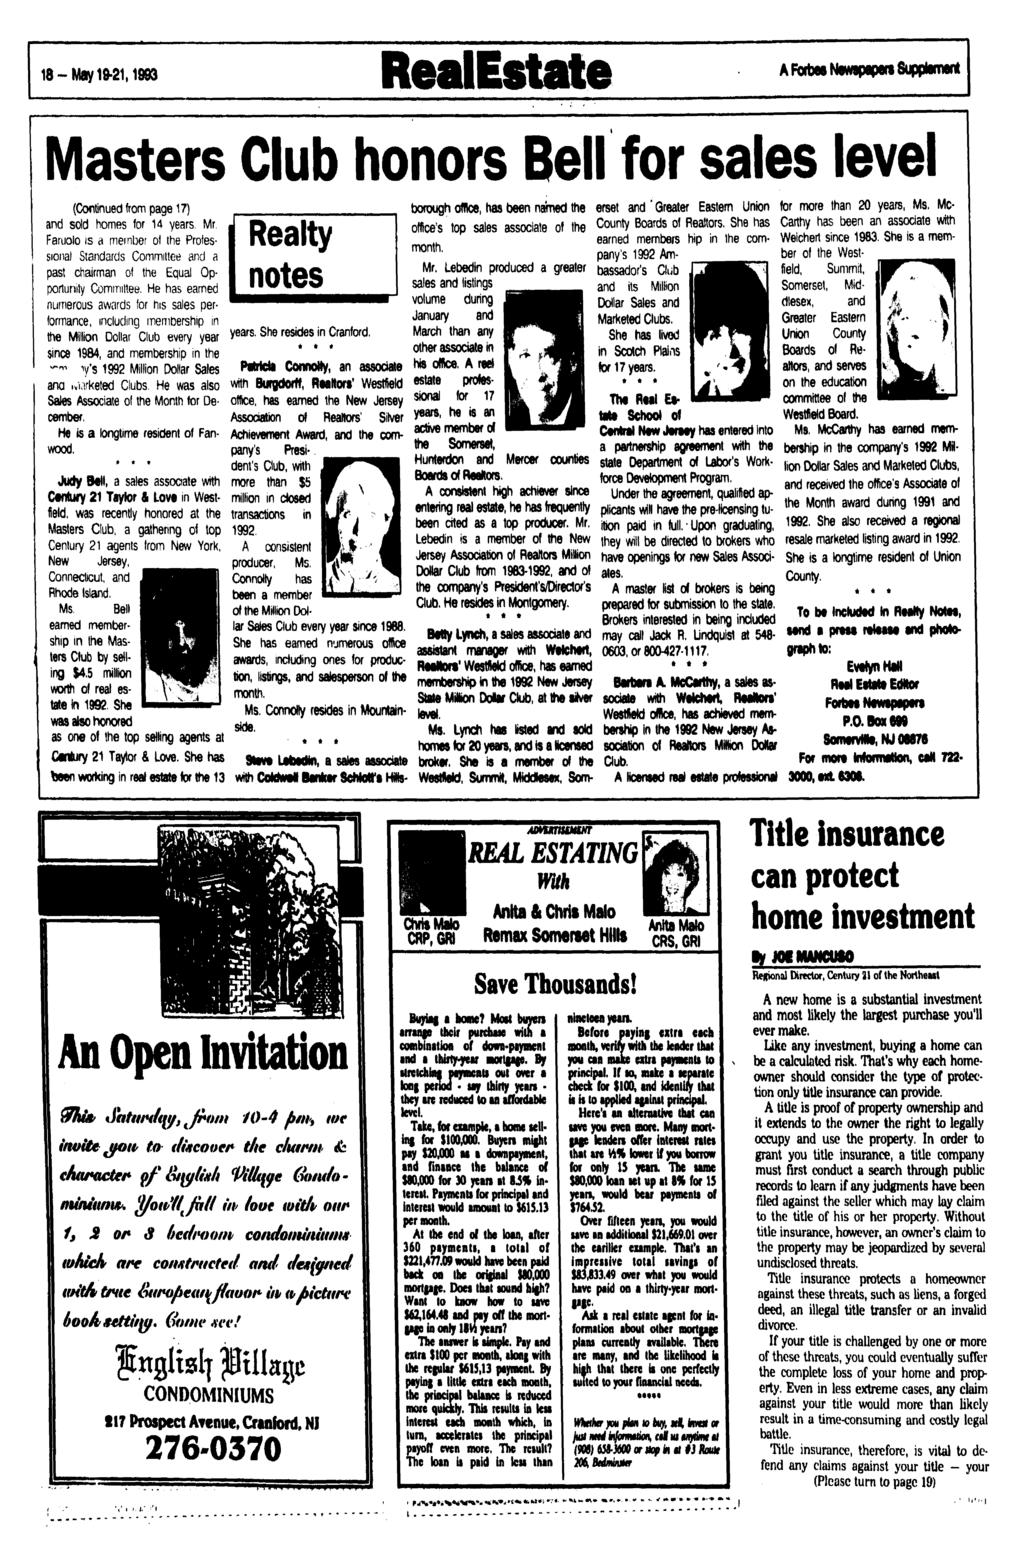 18 -M a y 19-21,1993 RealEstate A fortes Newspapers Supplement Masters Club honors Bell for sales level (Continued from page 17) and sold homes for 14 years. Mr.